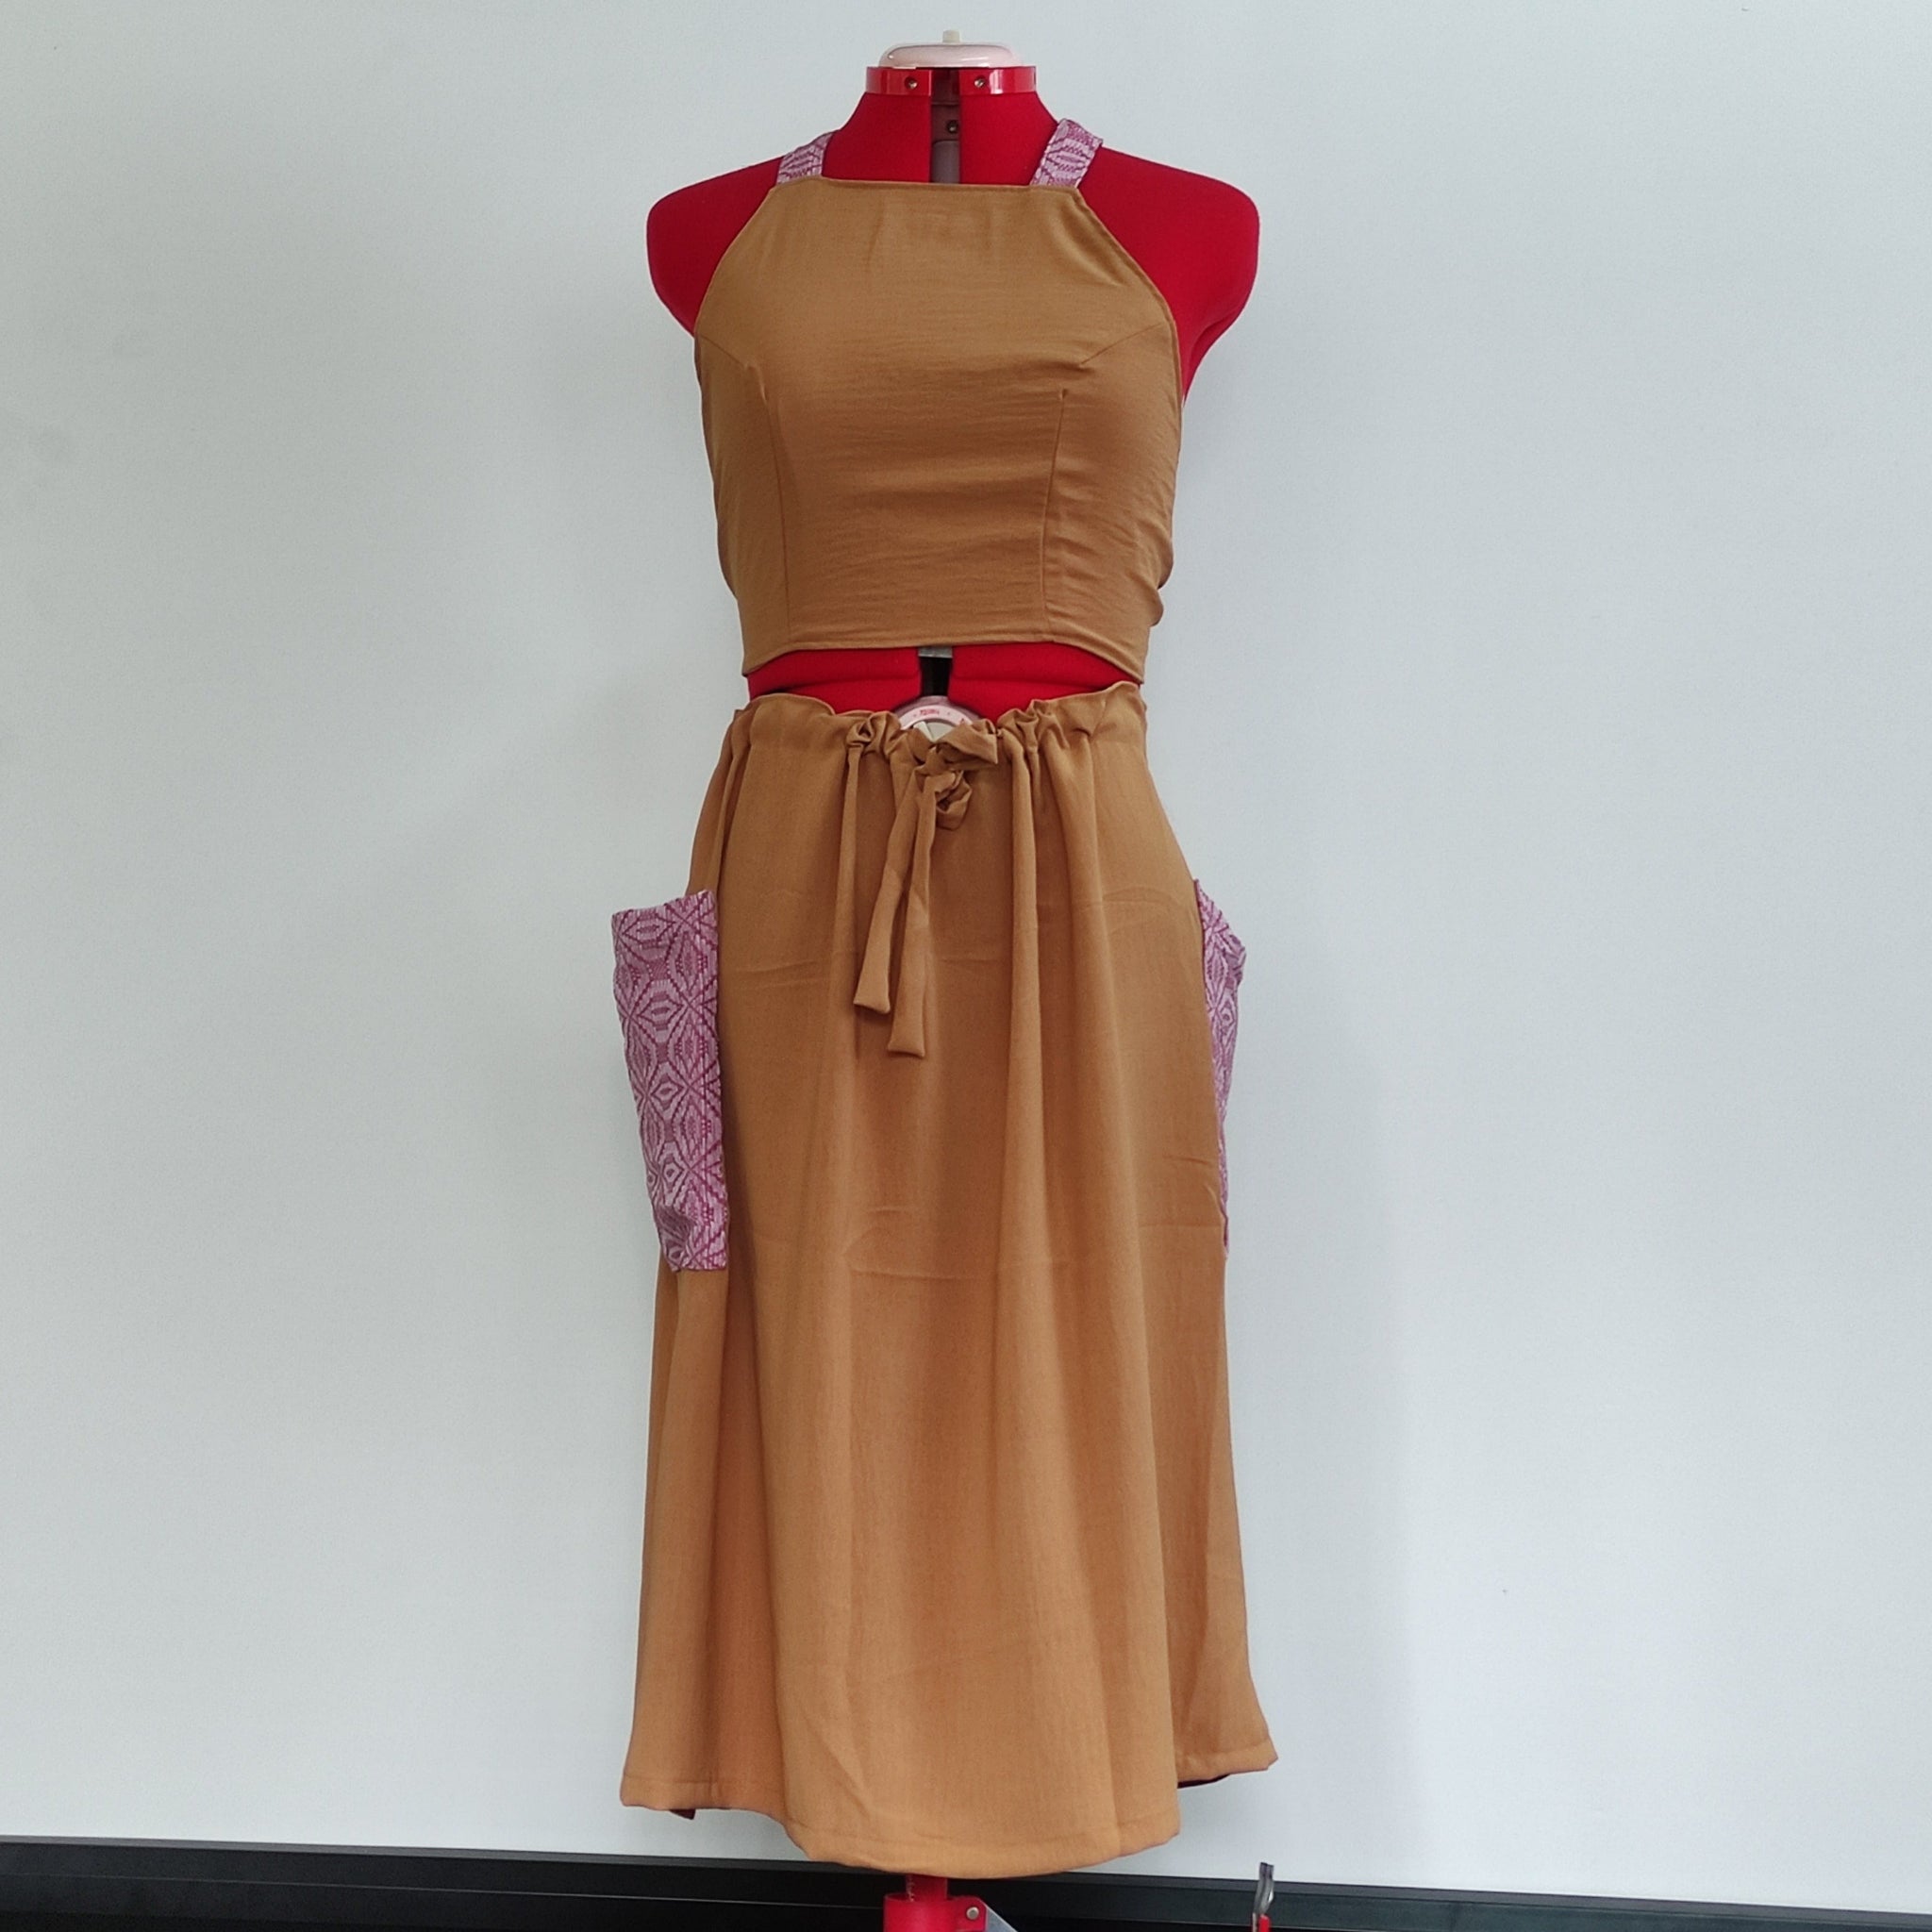 [SAMPLE] The Pinafore Coordinates Inspired Fashion Rags2Riches